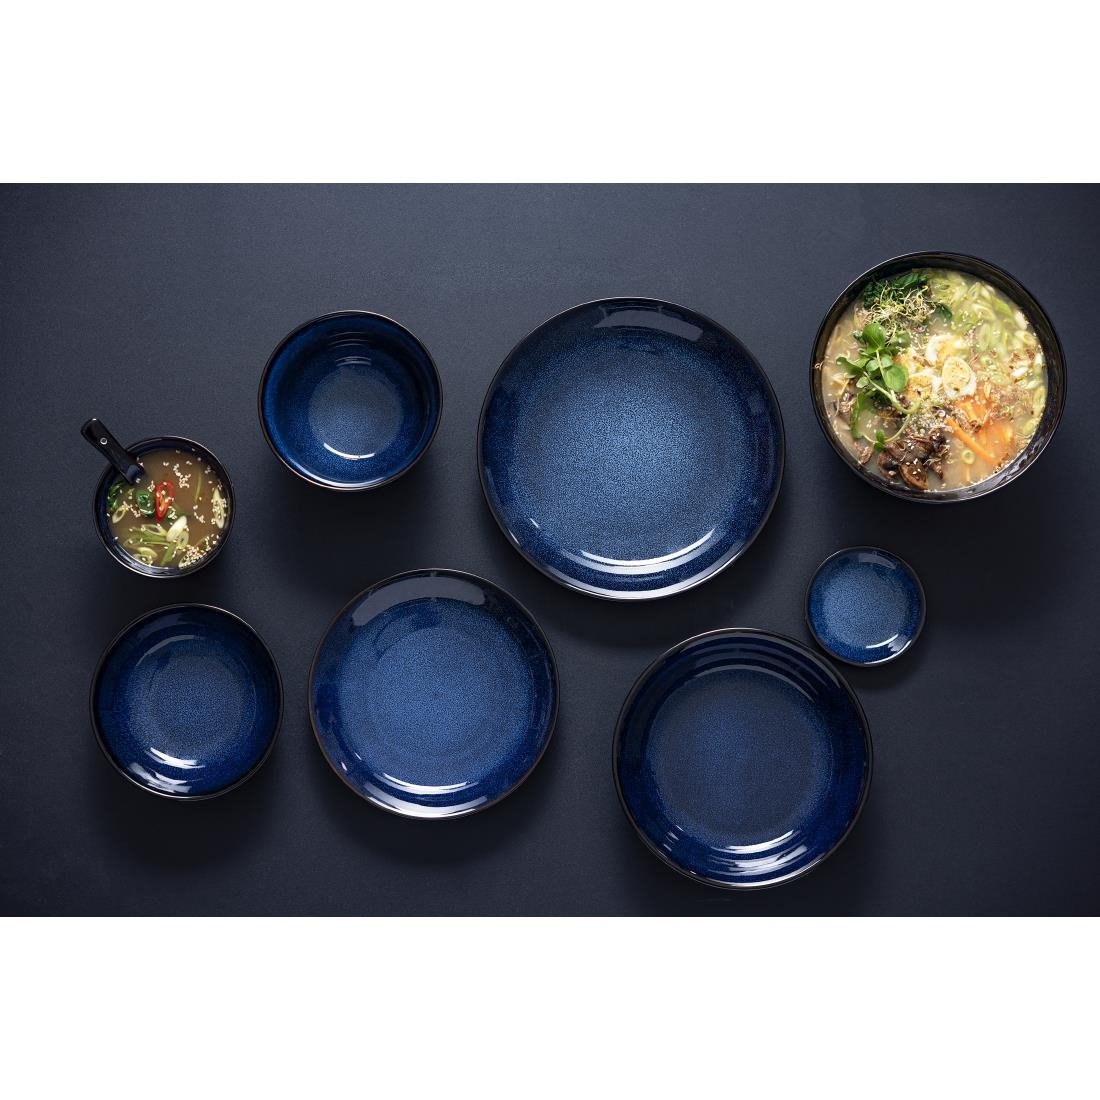 DZ774 Olympia Luna Midnight Blue Footed Bowls 115mm (Pack of 8)